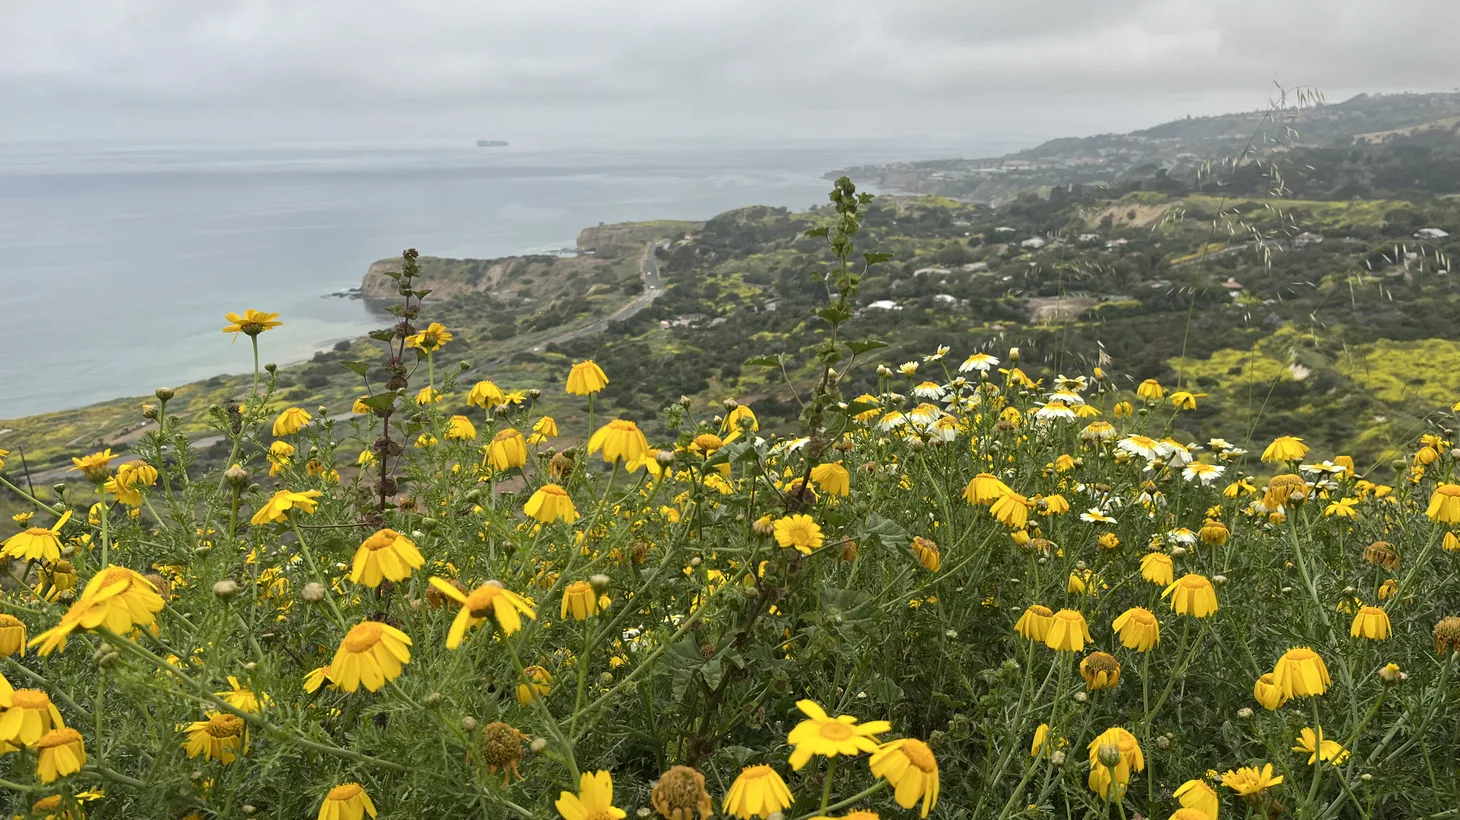 uring the spring, the reserves in Rancho Palos Verdes are filled with yellow wildflowers. This is the view from the top of the Portuguese Bend Reserve in April 2023, looking down toward Abalone Cove.